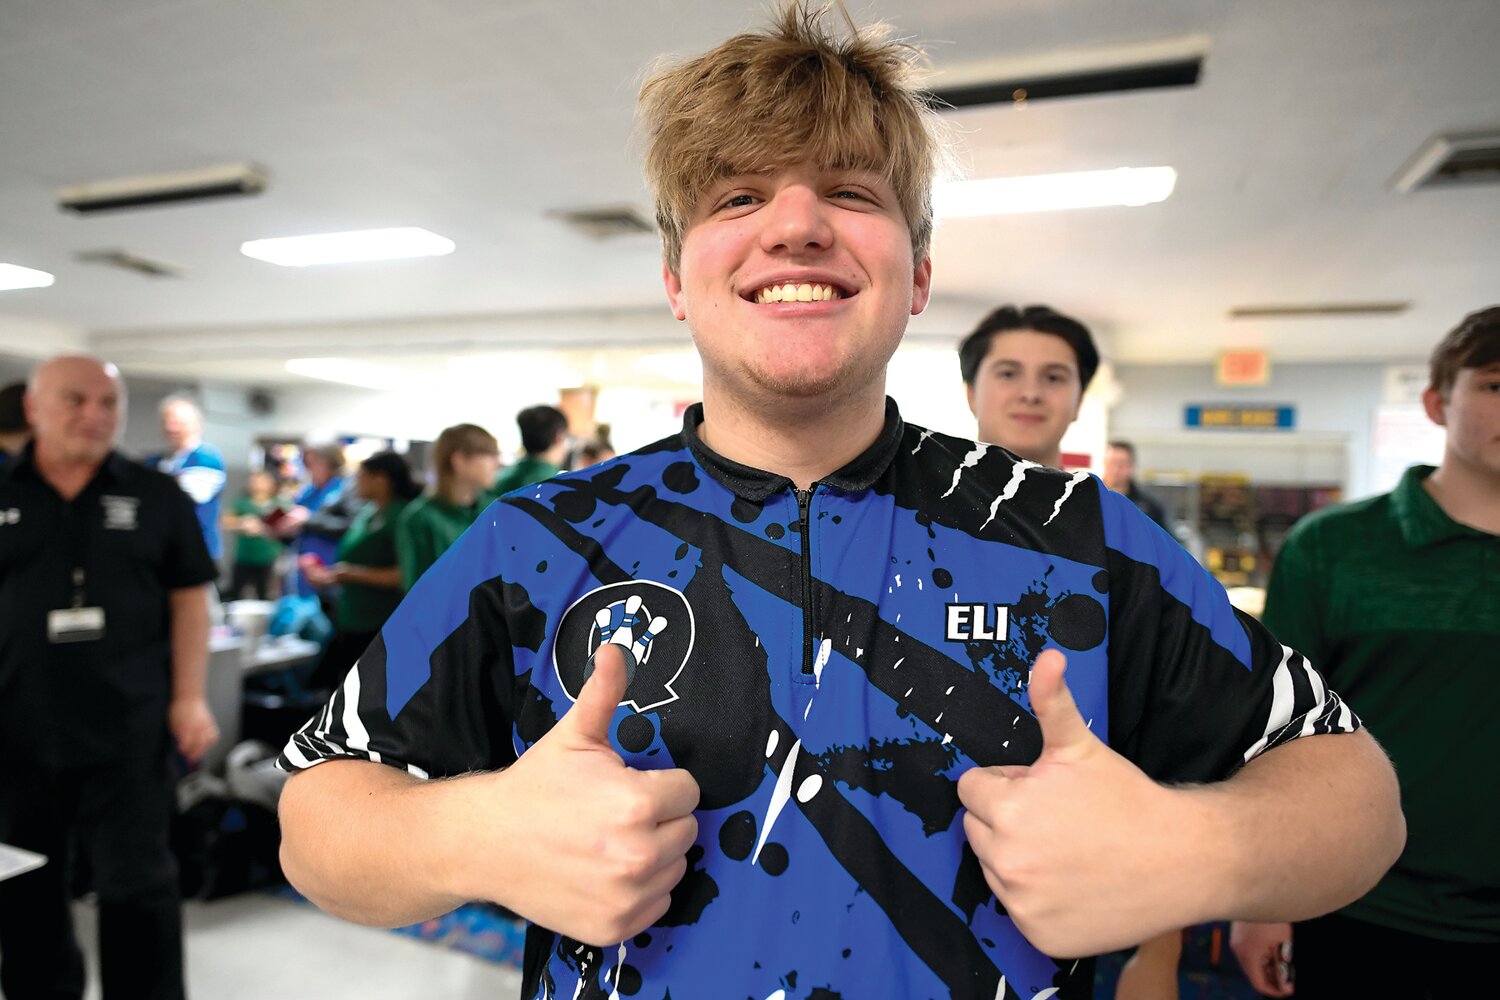 Quakertown bowler Eli Pint, who carries a 187 average, gives the thumbs up after his strike in the second game of the match.